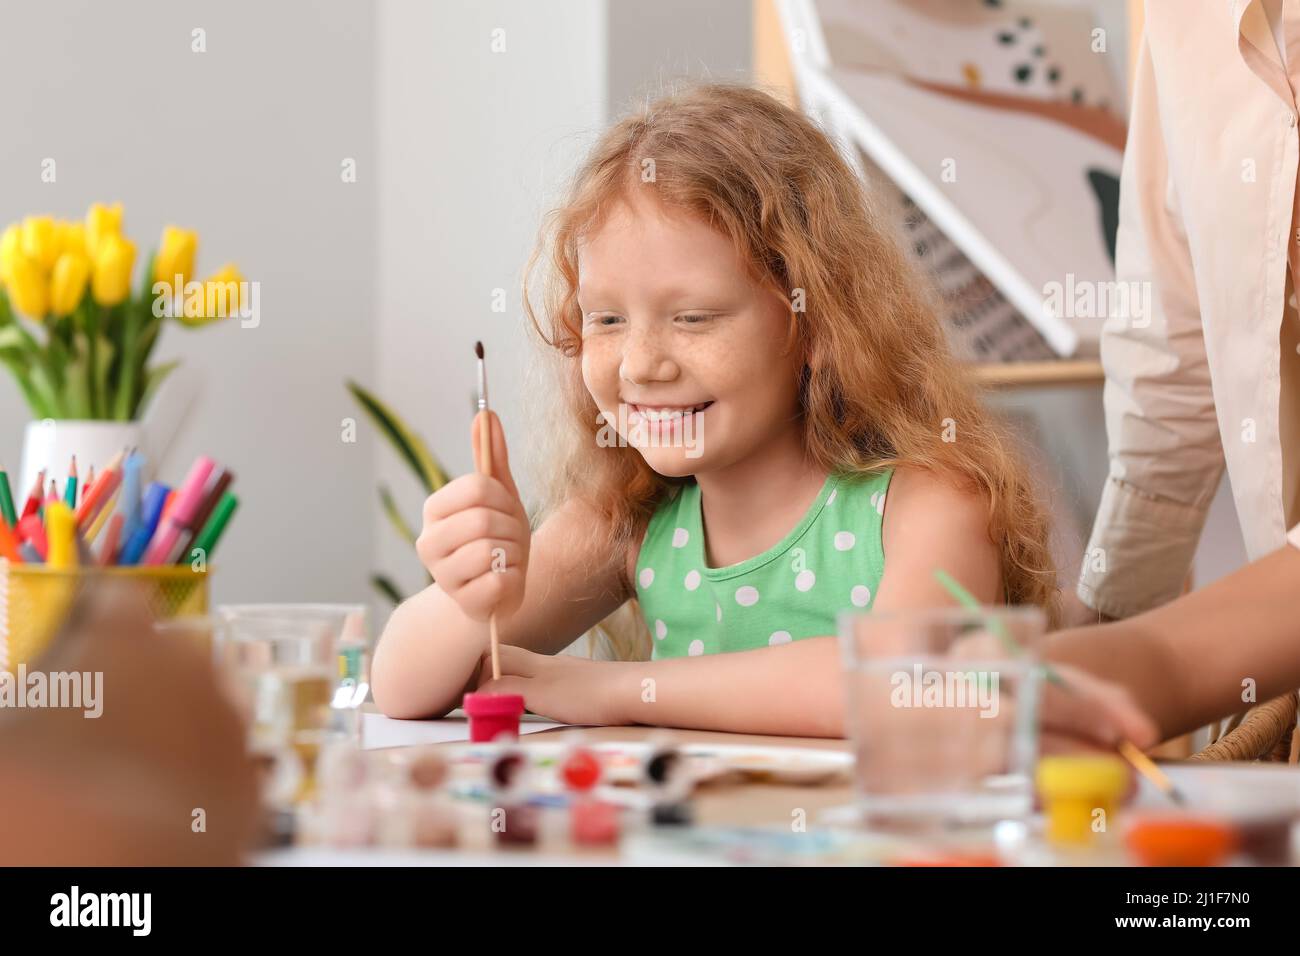 Cute girl painting during master-class in art Stock Photo